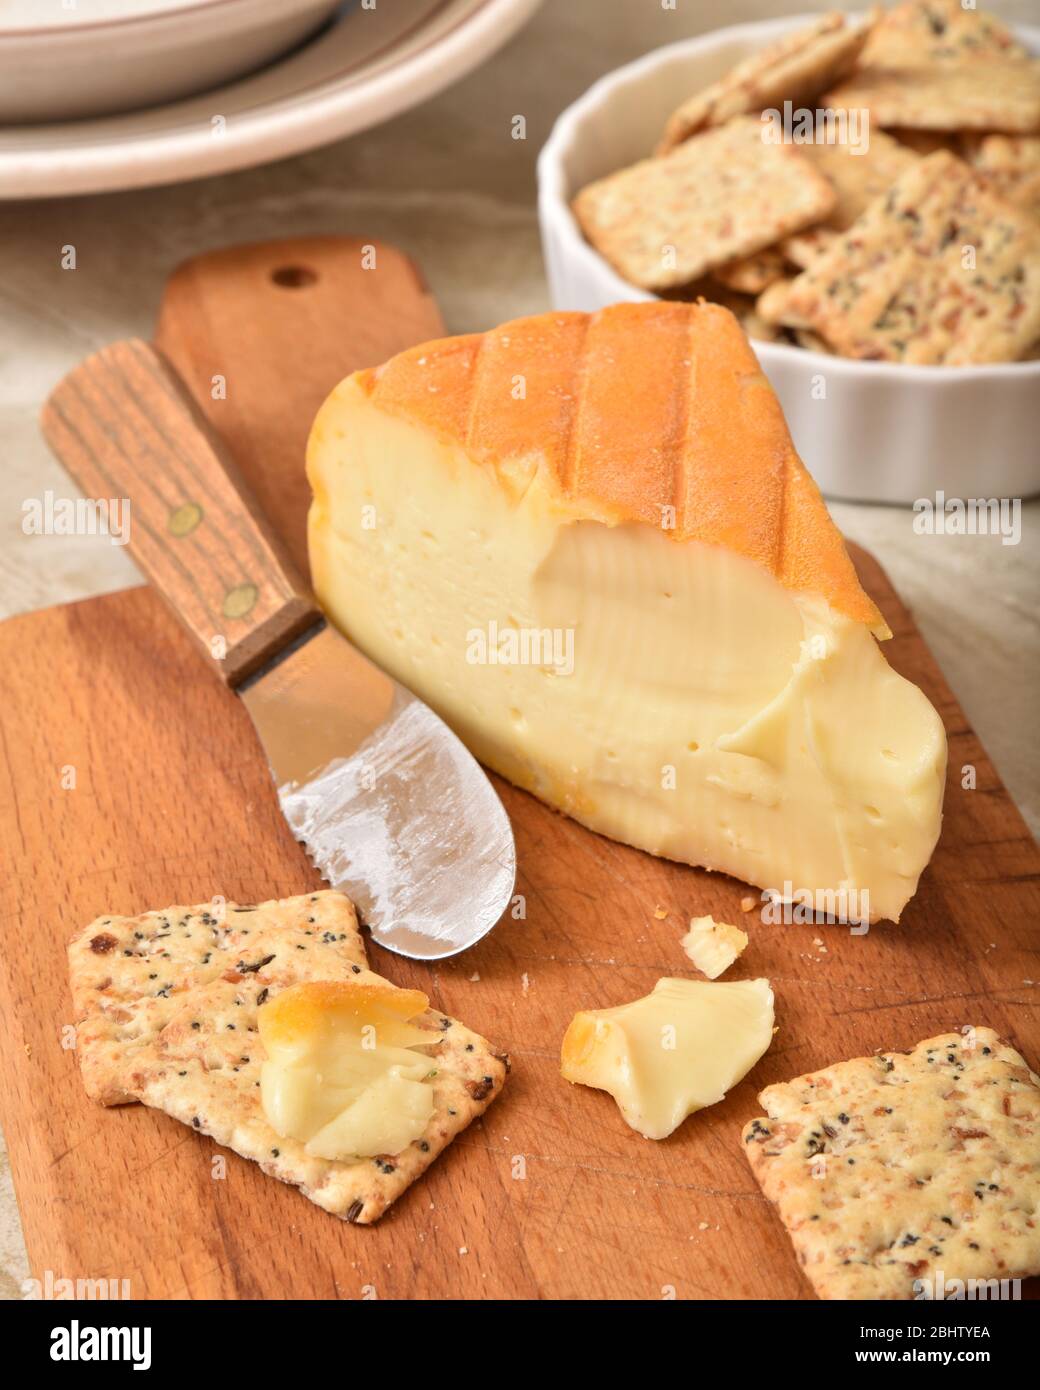 A wedge of imported Belgium cheese with whole grain artisan crackers Stock Photo